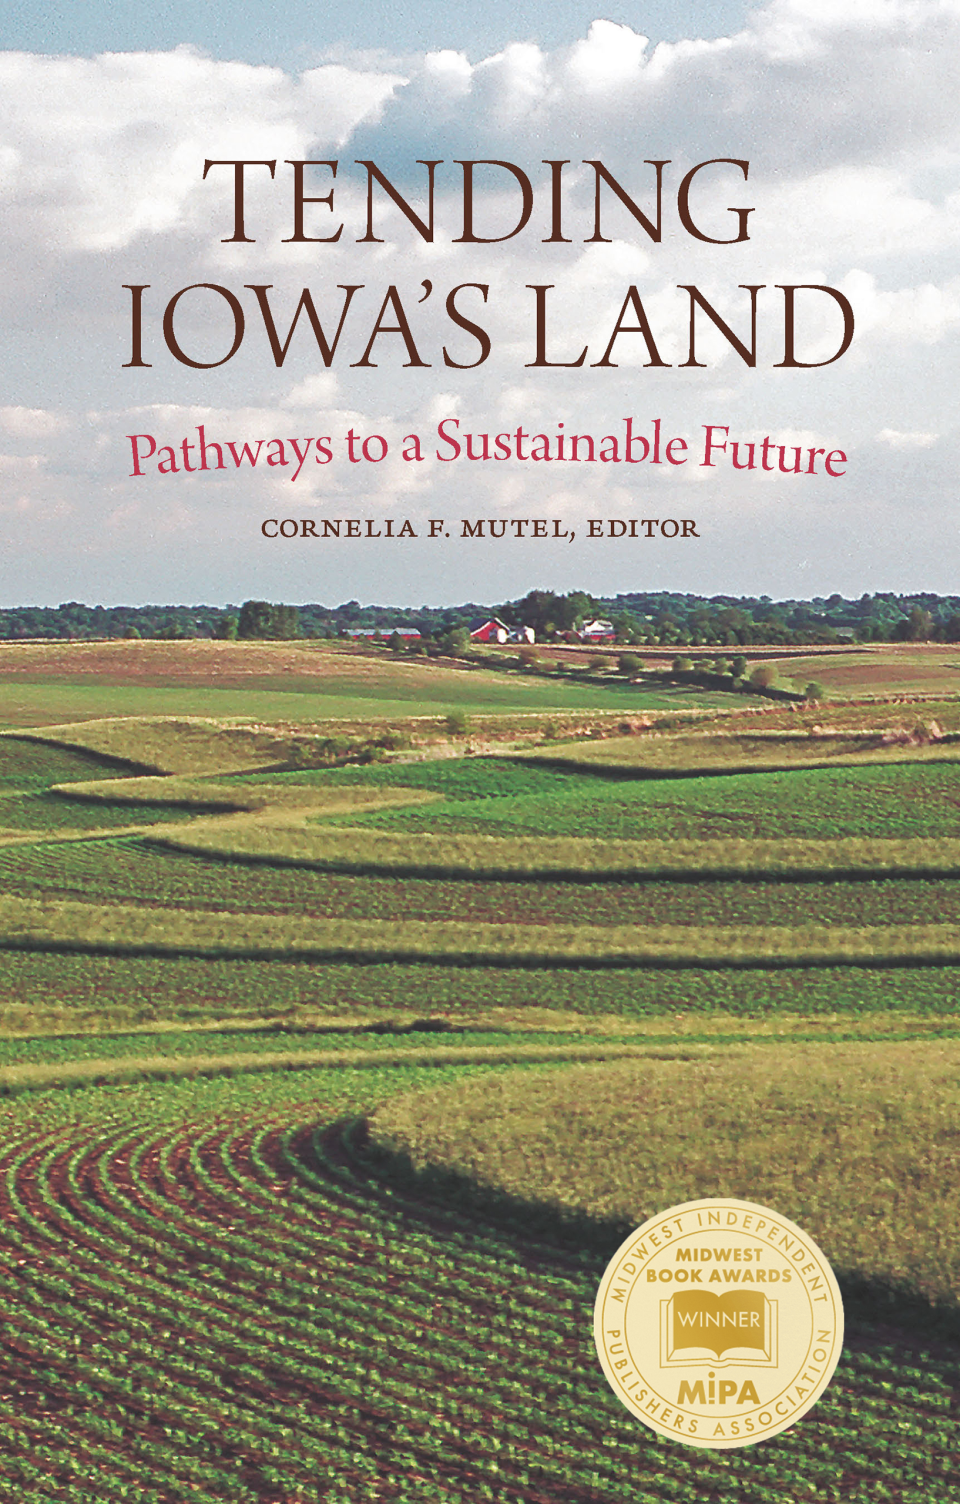 "Tending Iowa's Land: Pathways to a Sustainable Future," features premier scientists and experts consider what has happened to our land and outline viable solutions that benefit agriculture as well as the state’s human and wild residents. The book is edited by Connie Mutel.